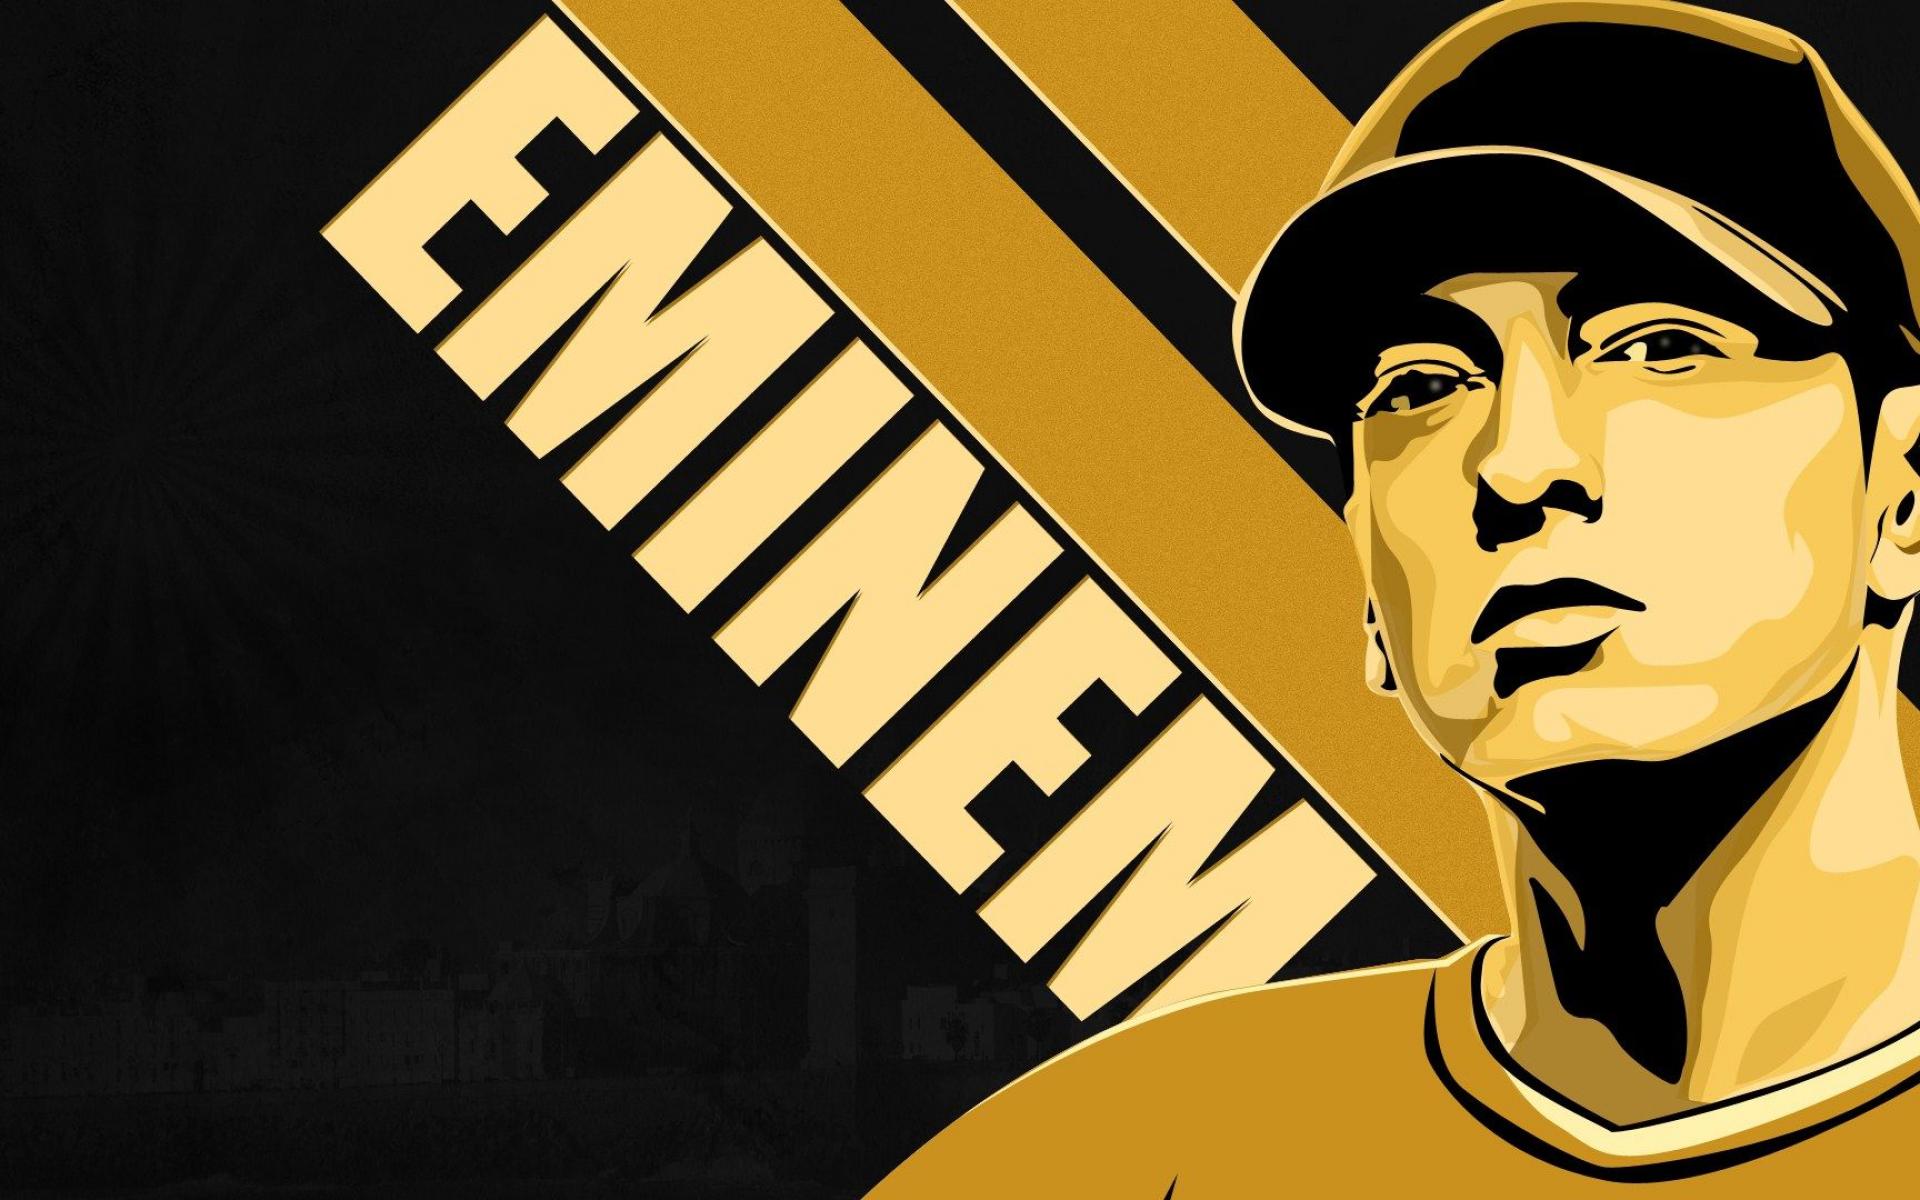 Eminem 4K wallpaper for your desktop or mobile screen free and easy to download